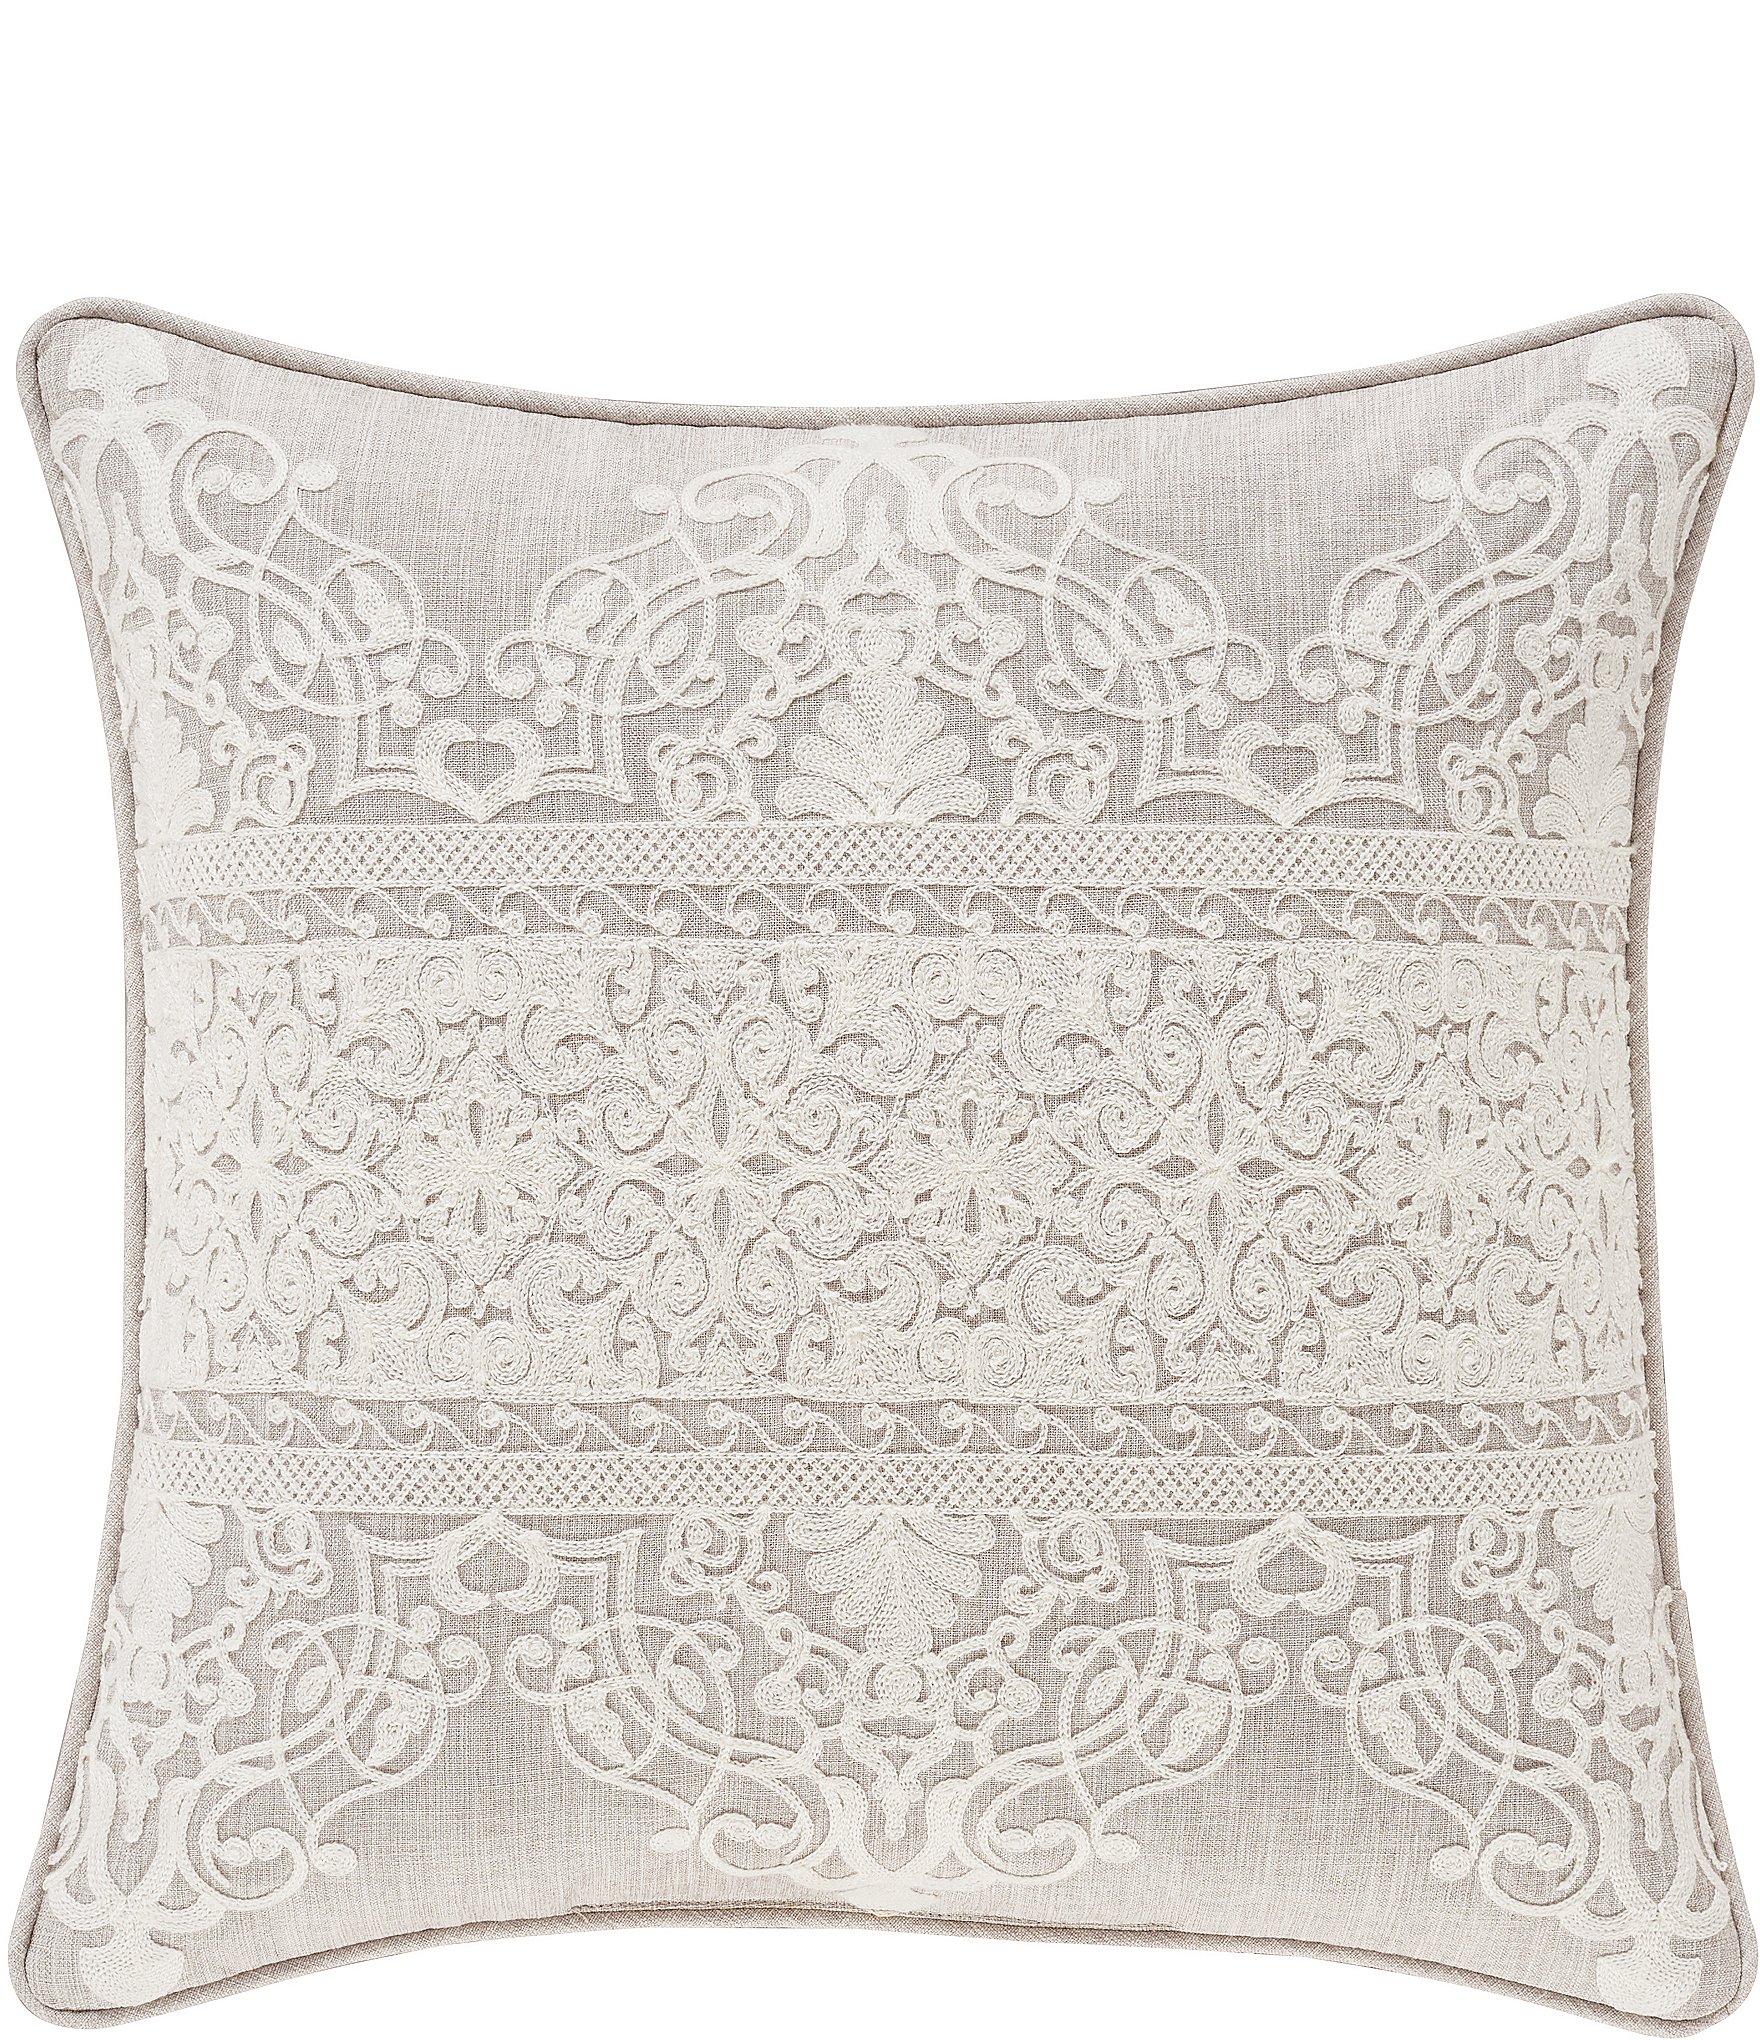 J Queen Sandstone Beige Square Embellished Decorative Throw Pillow 18W x 18L  – Latest Bedding